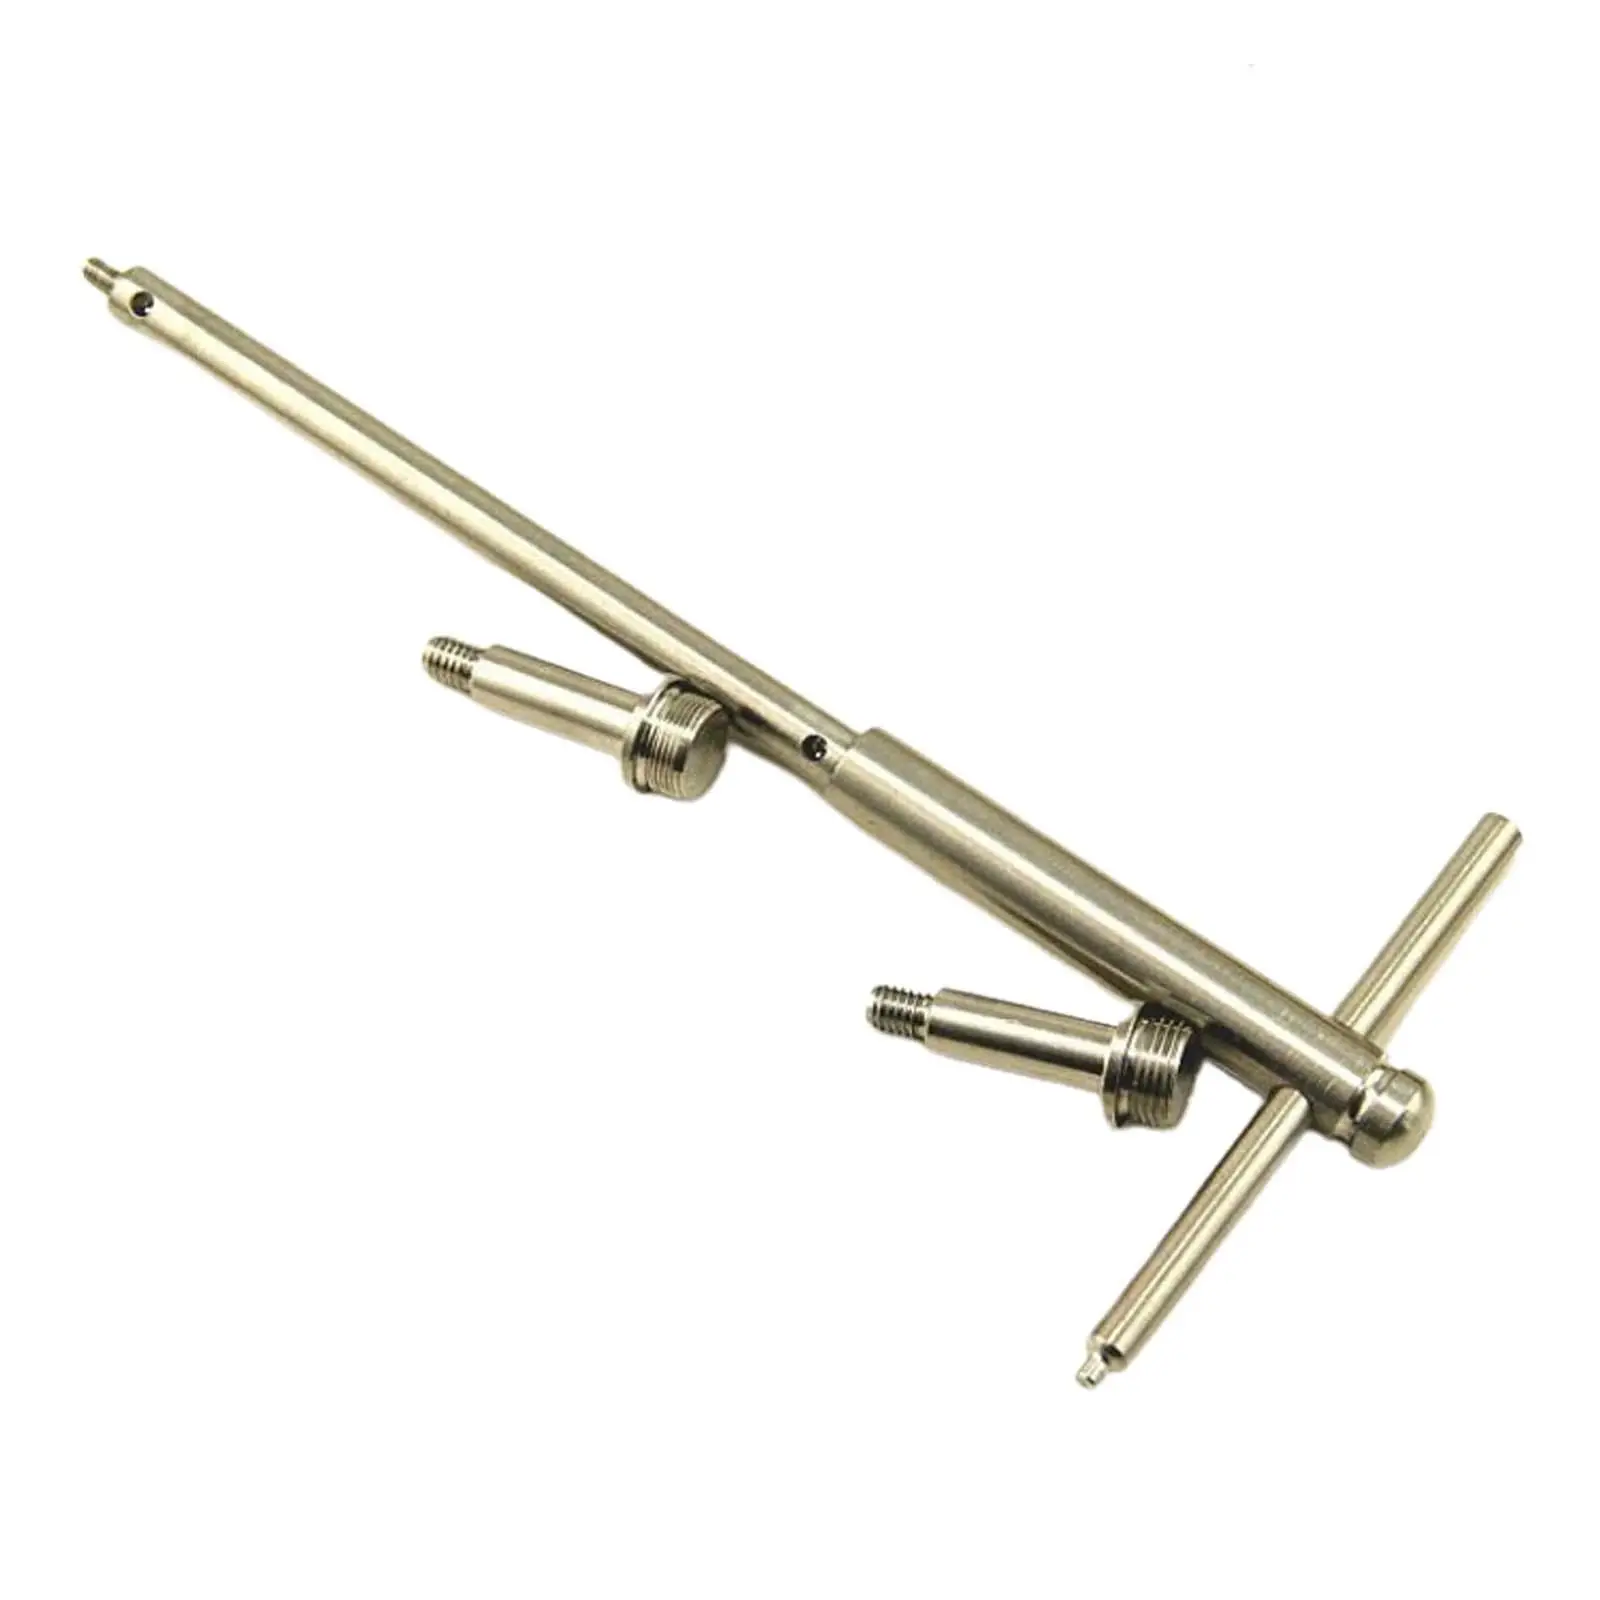 Trumpet Piston Grinding Auxiliary Tools Steel Connecting Piston for Trumpet Brass Parts Vertical Key Copper Wind Instruments